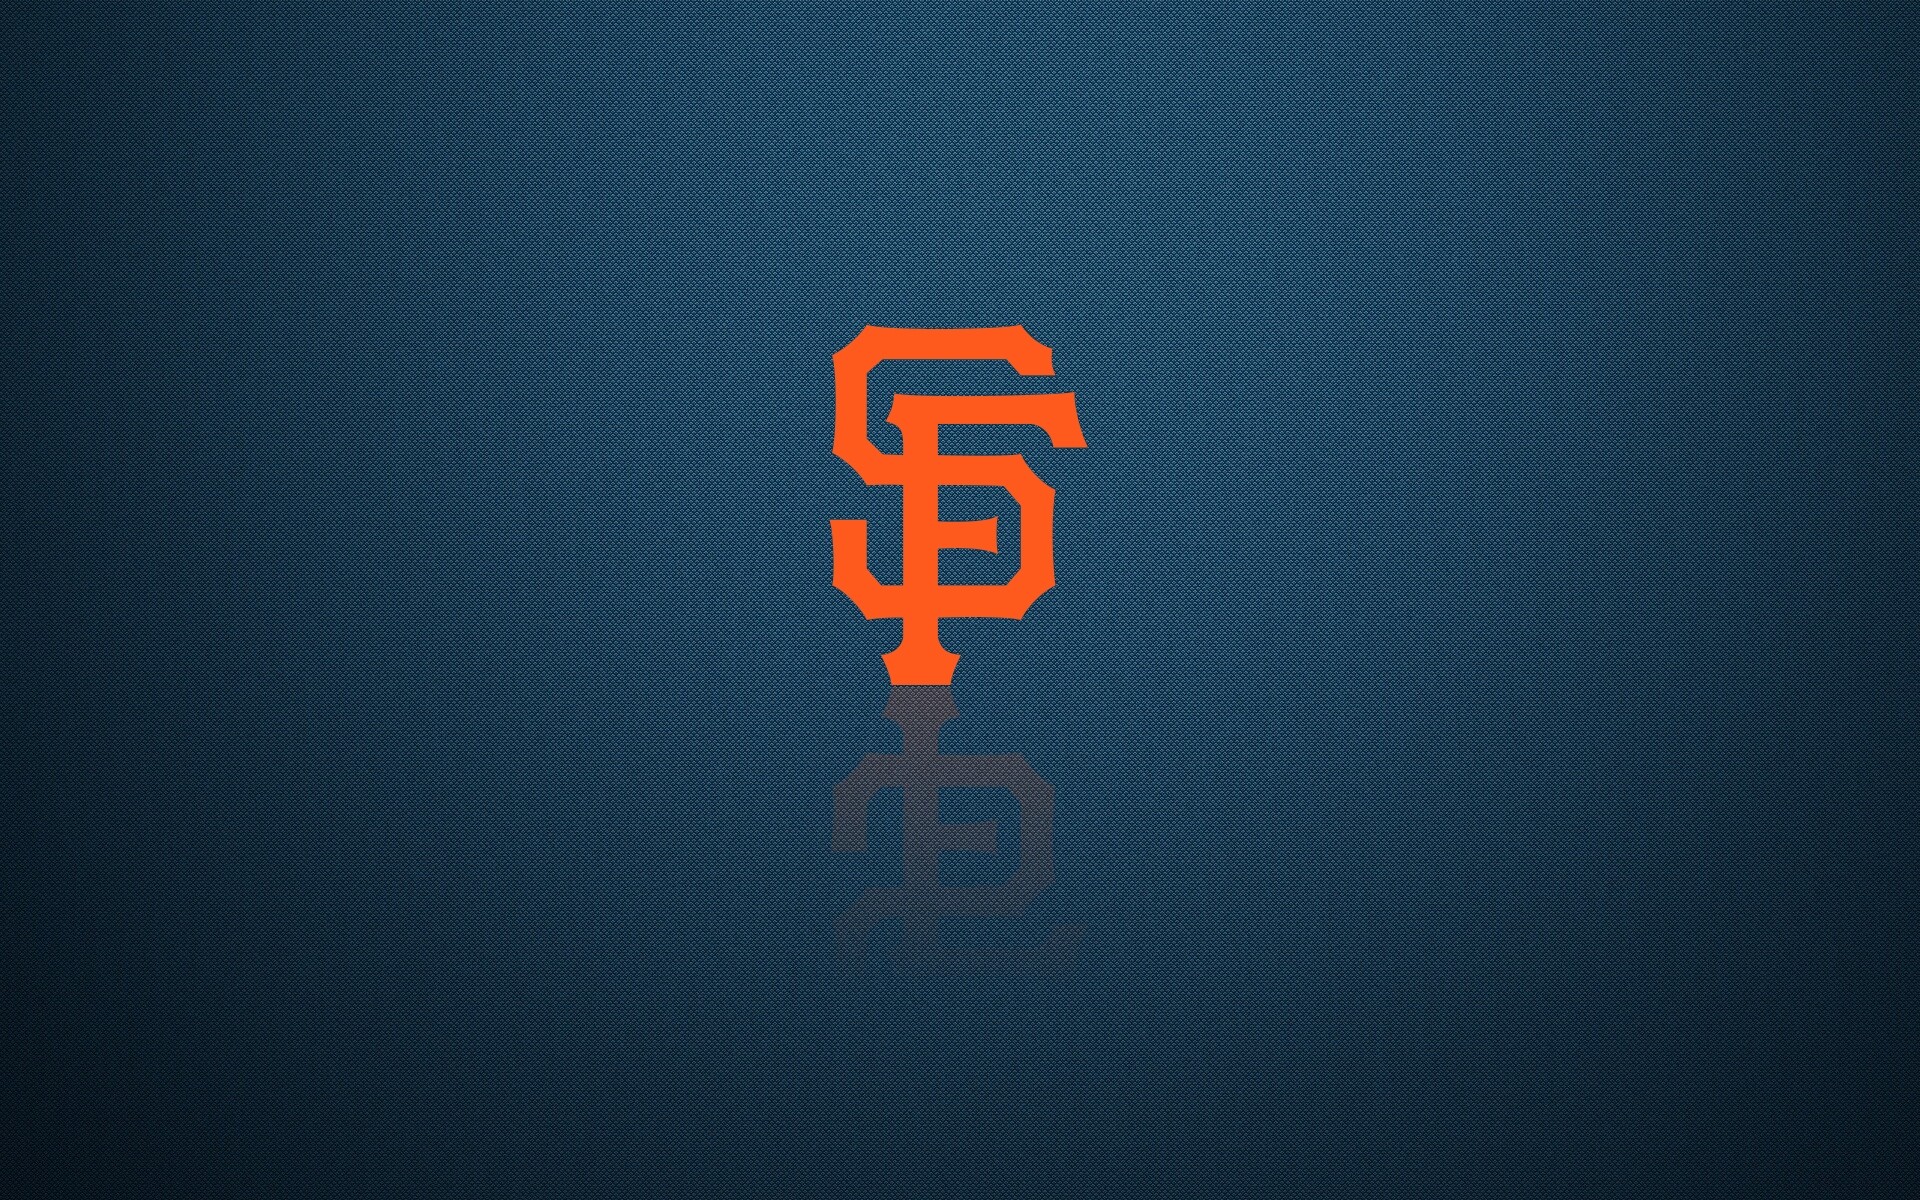 San Francisco Giants: Formed a baseball dynasty that saw wins in the World Series in 2010, 2012, and 2014. 1920x1200 HD Background.